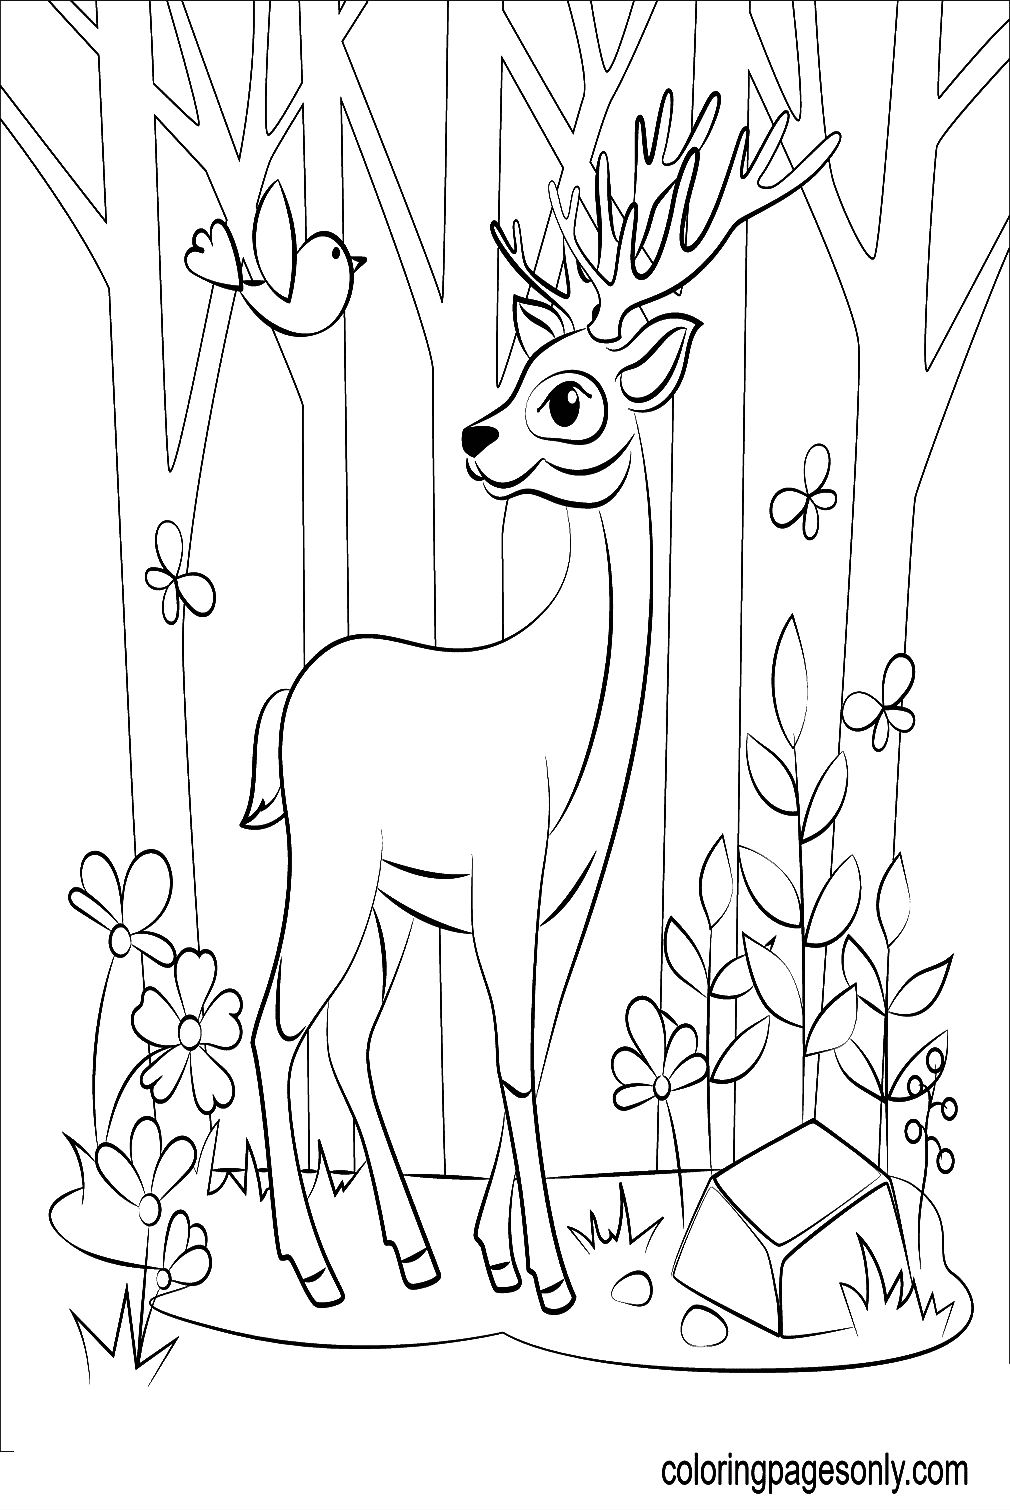 Reindeer In The Forest Coloring Pages